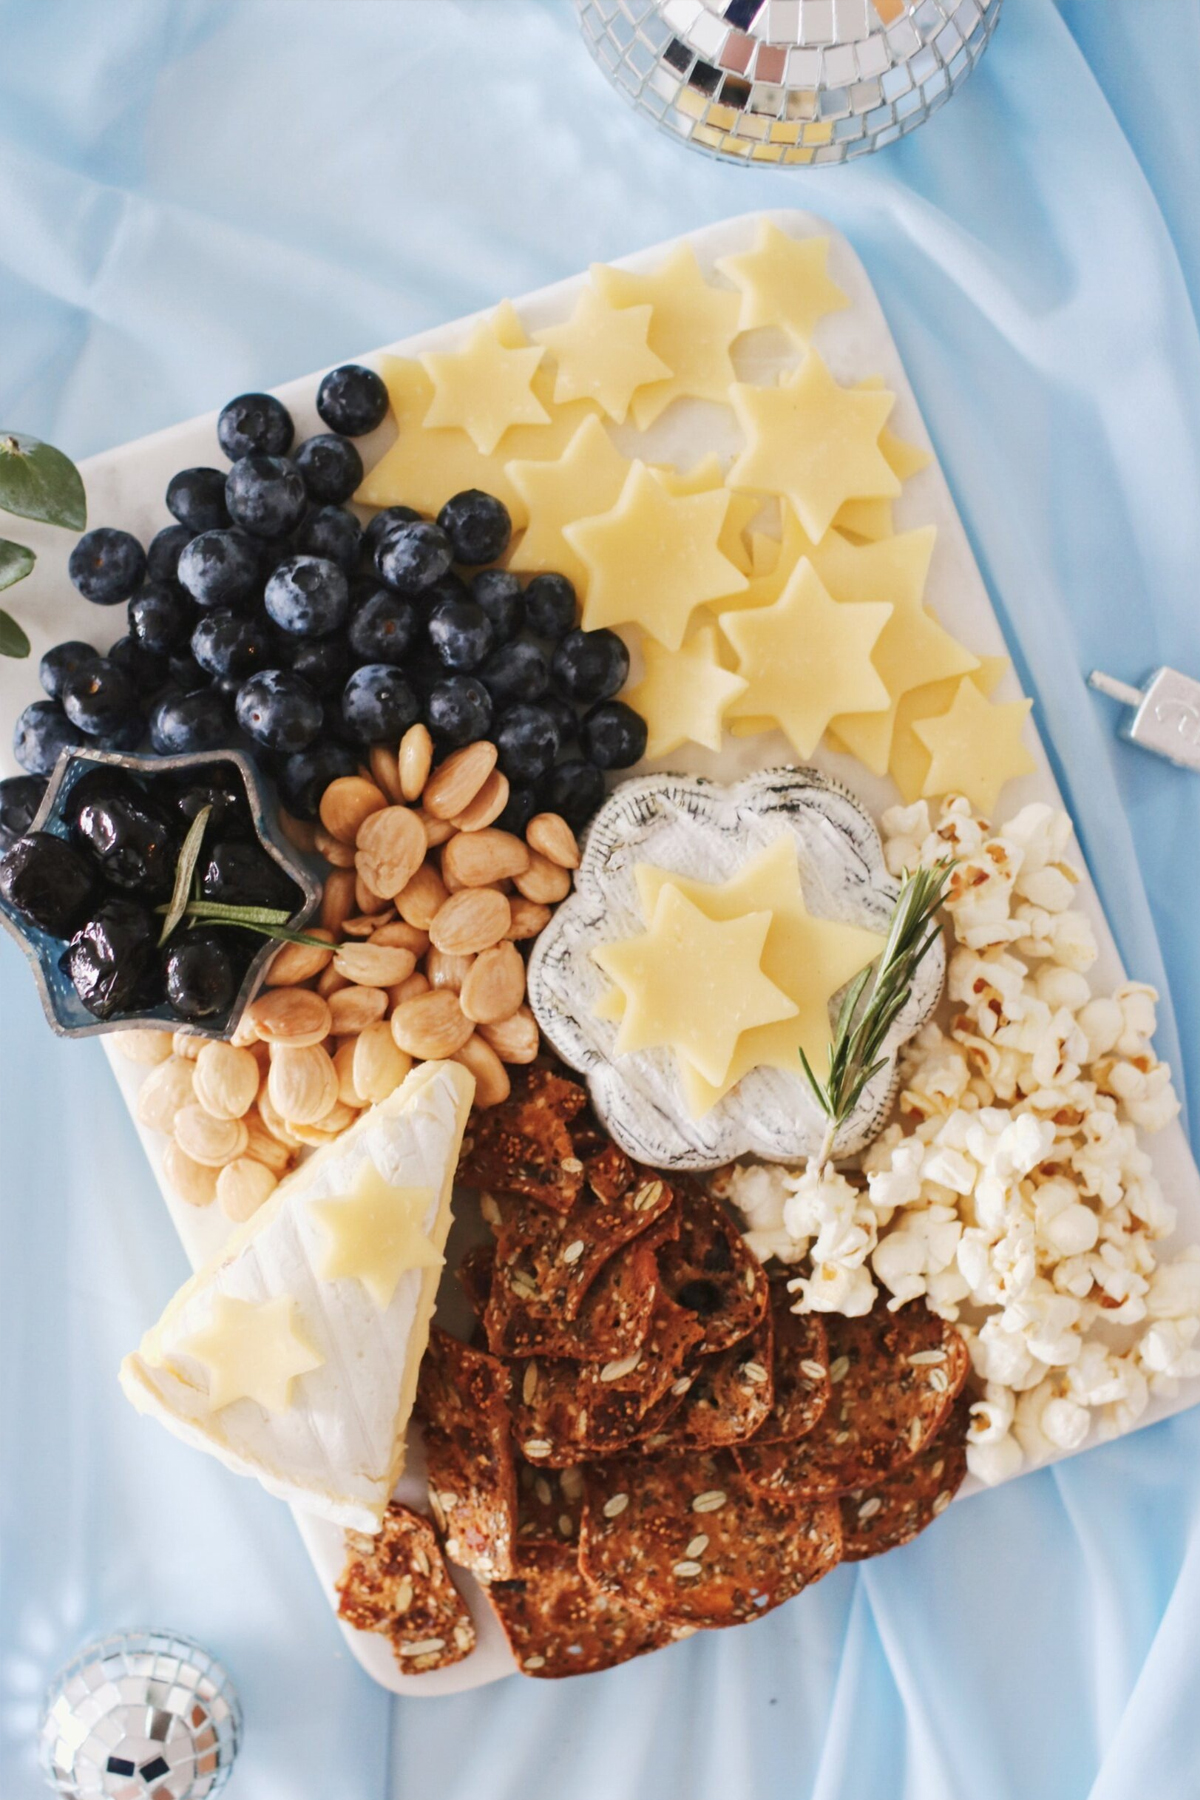 Star of David sliced cheese, brie blueberries, crackers, and popcorn are all on this Hanukkah charcuterie board recipe from Rebekah Lewin